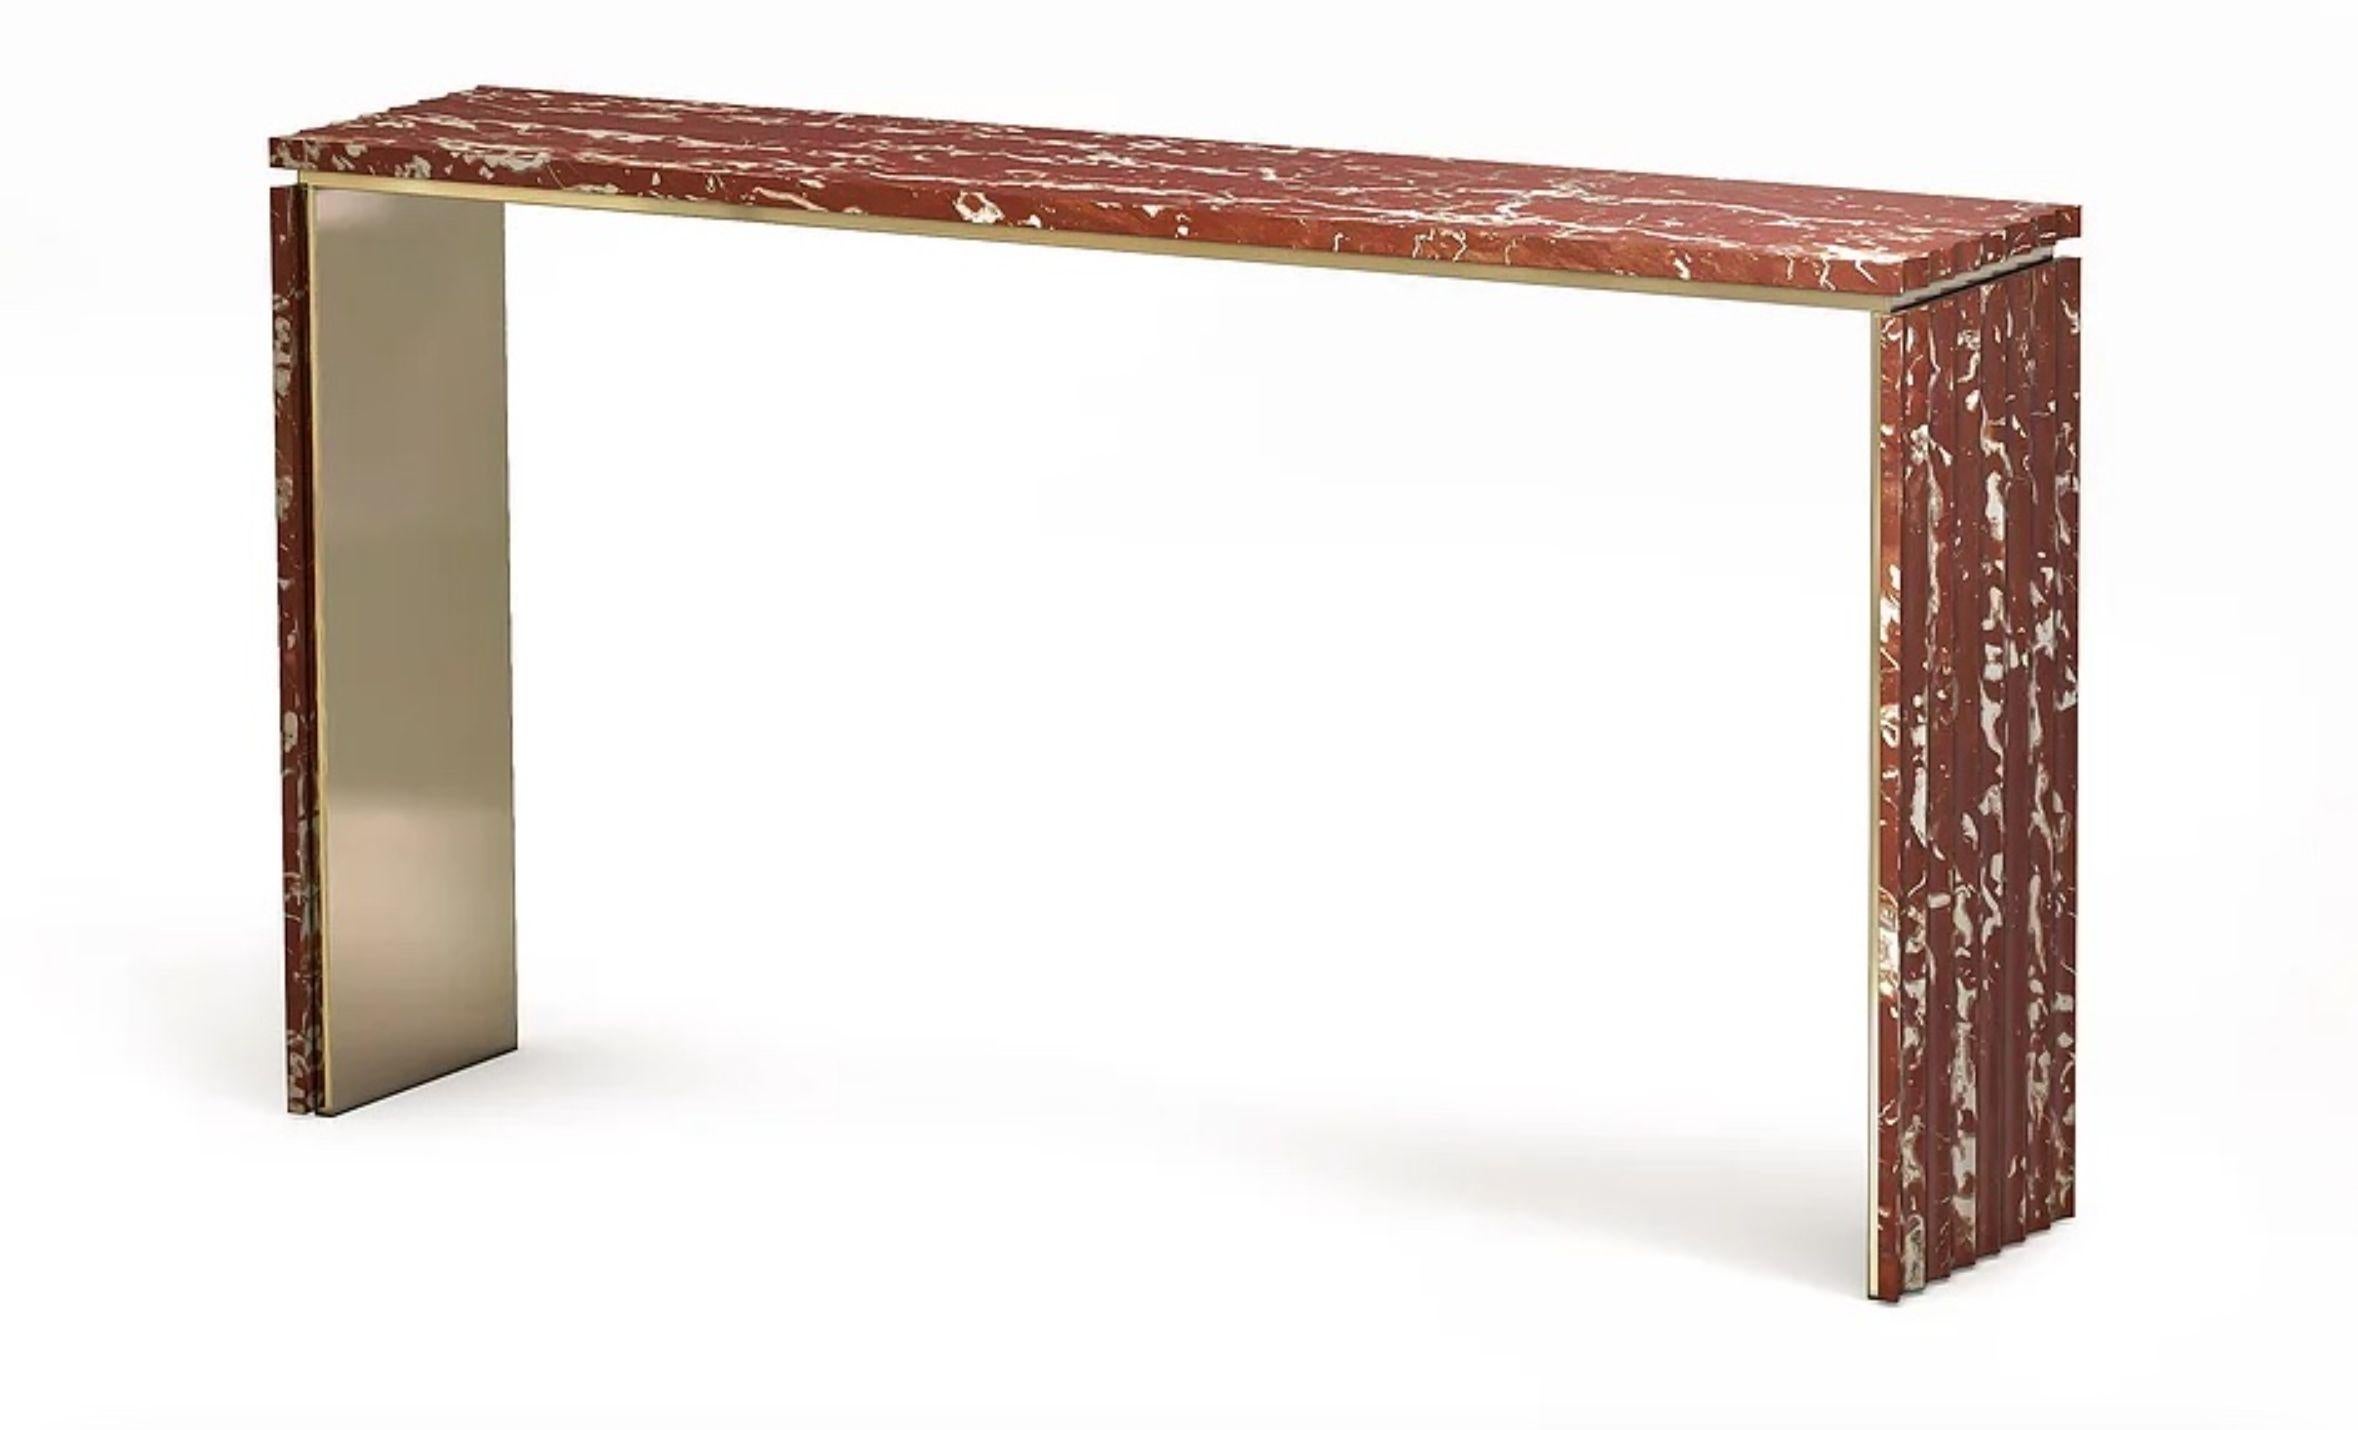 Curves marble console by Marmi Serafini
Materials: marble and brass
Dimensions: D 40 x W 180 x H 90 cm

Other marbles available.

Console with soft and sophisticated lines embellished by the undulating side surfaces leaving the horizontal part